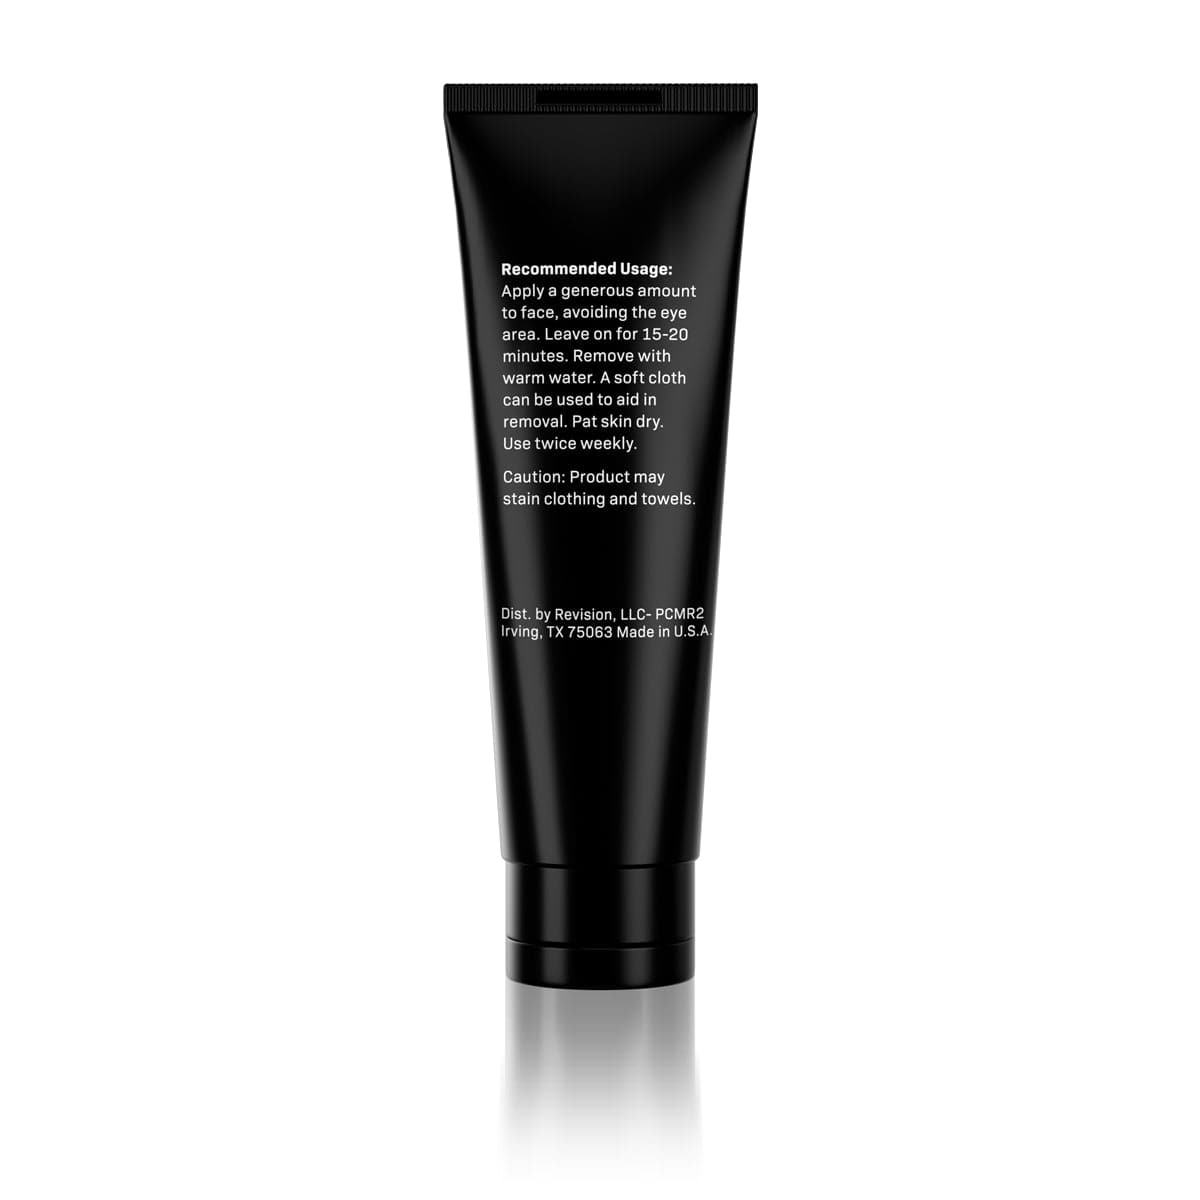 Pore Purifying Clay Mask 1.7 oz